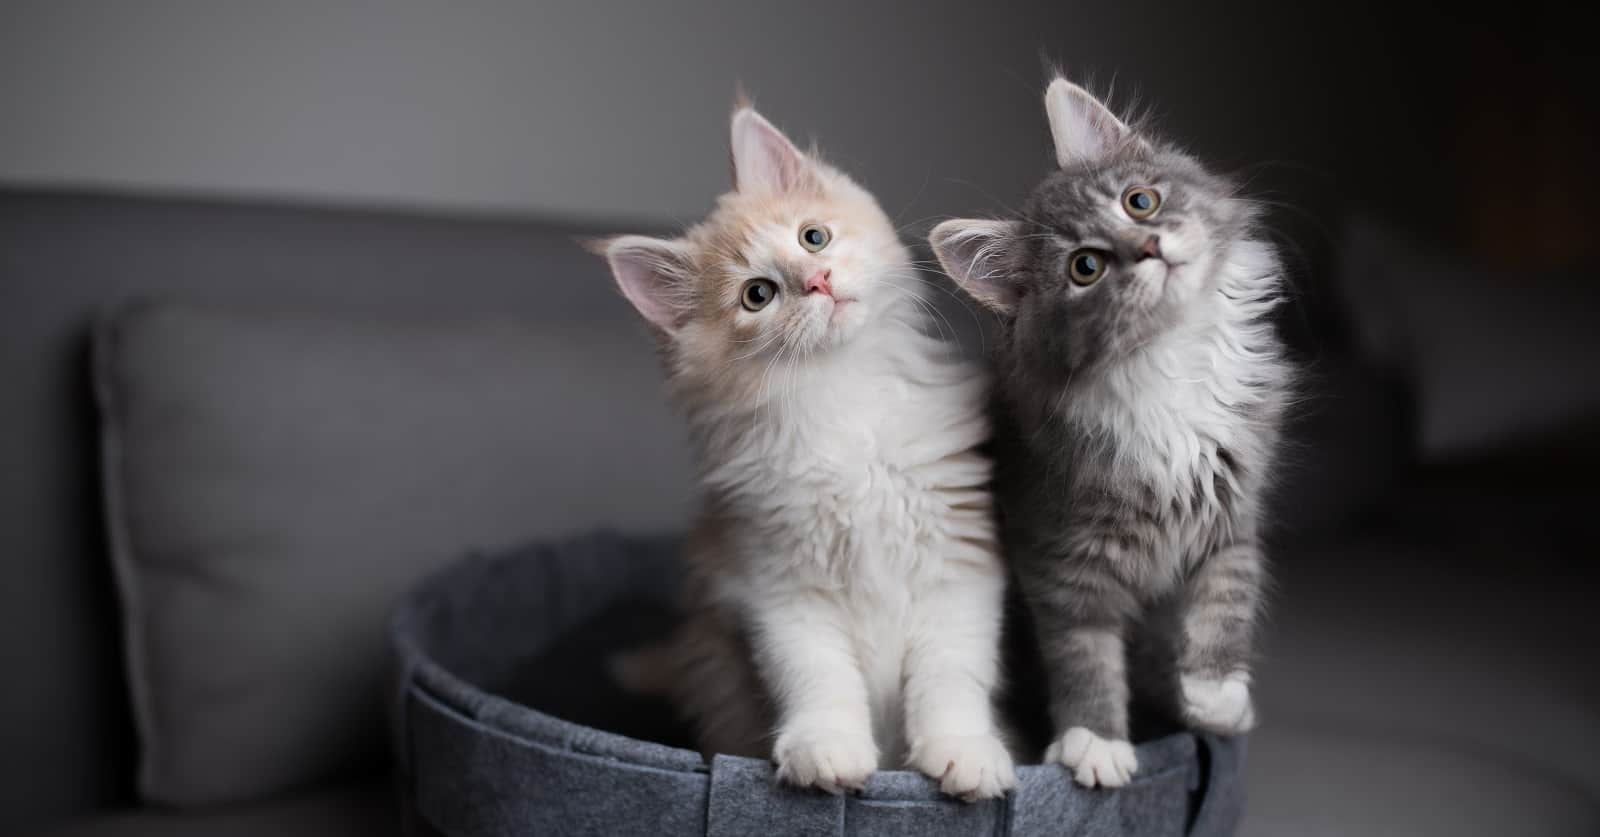 Thinking about adopting multiple cats at once but not sure if it's a good idea? Take a look at the pros and cons to help you decide!